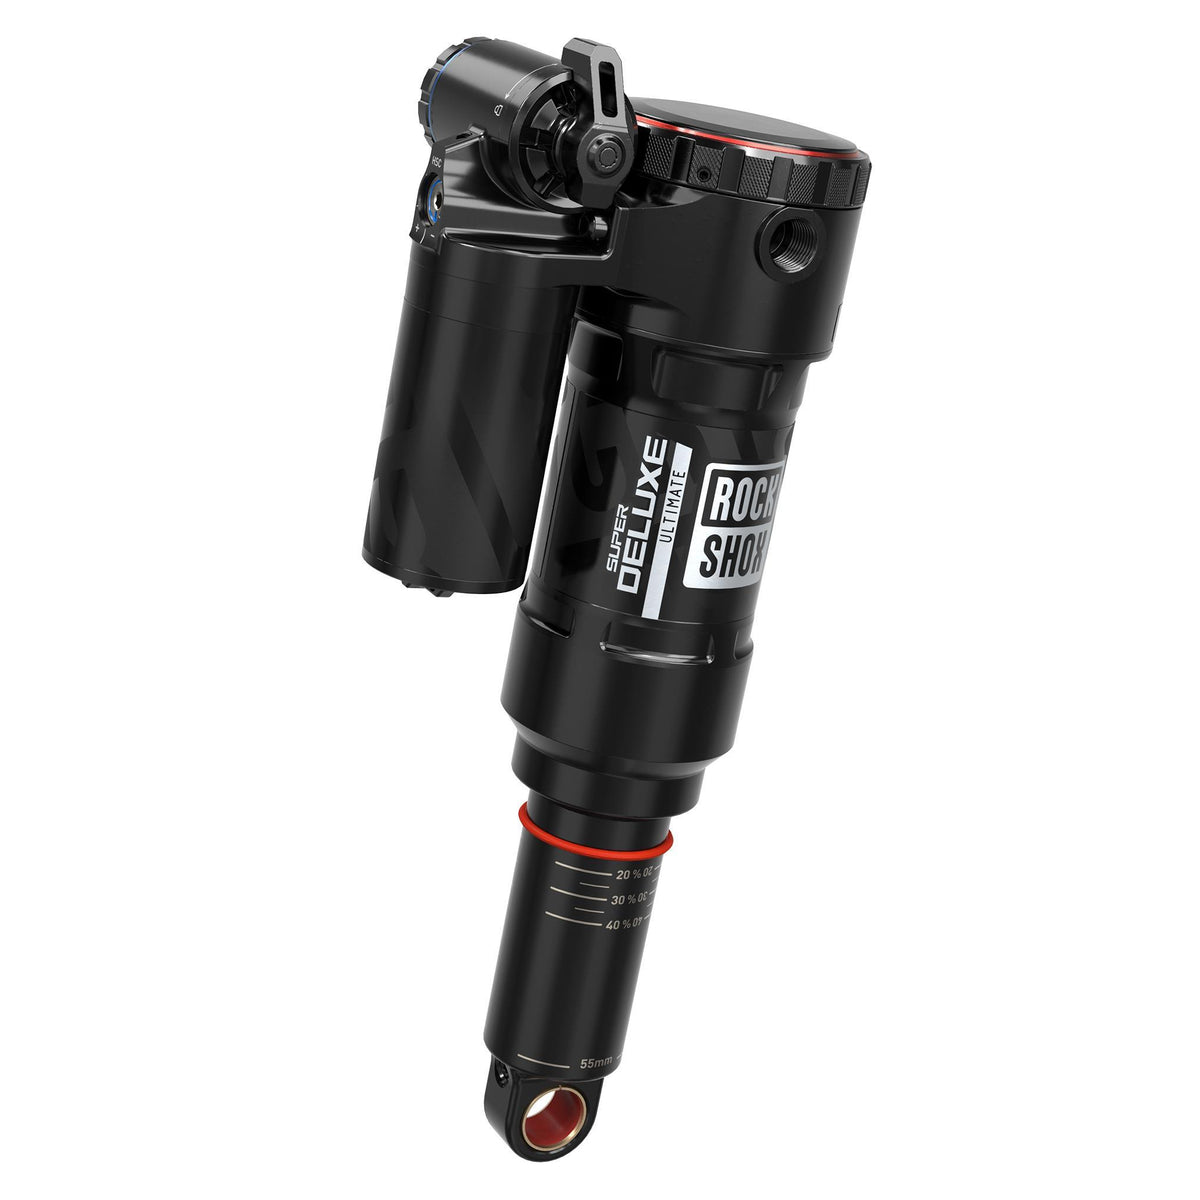 Rockshox Super Deluxe Ultimate Rear Shock RC2T - Progressive Air, 0Neg/4Pos Tokens, Linearreb/Lcomp, 380LB Lockout, Hydraulic Bottom Out, Trunnion Nobushing,C1 Specializedenduro2020+ Black 205X60